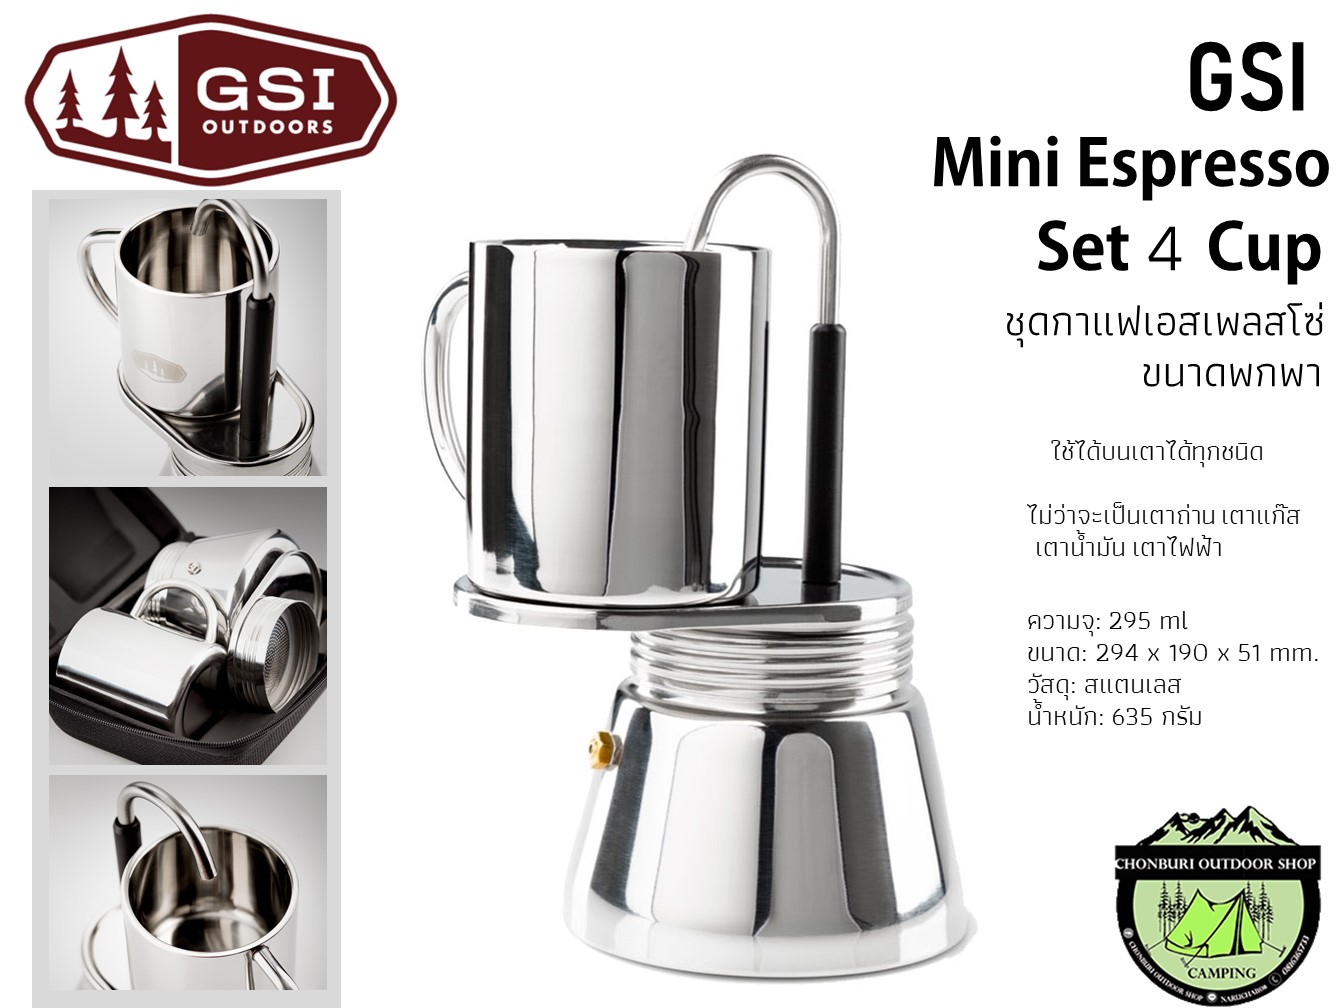 GSI Outdoors MiniEspresso Set 4 Cup